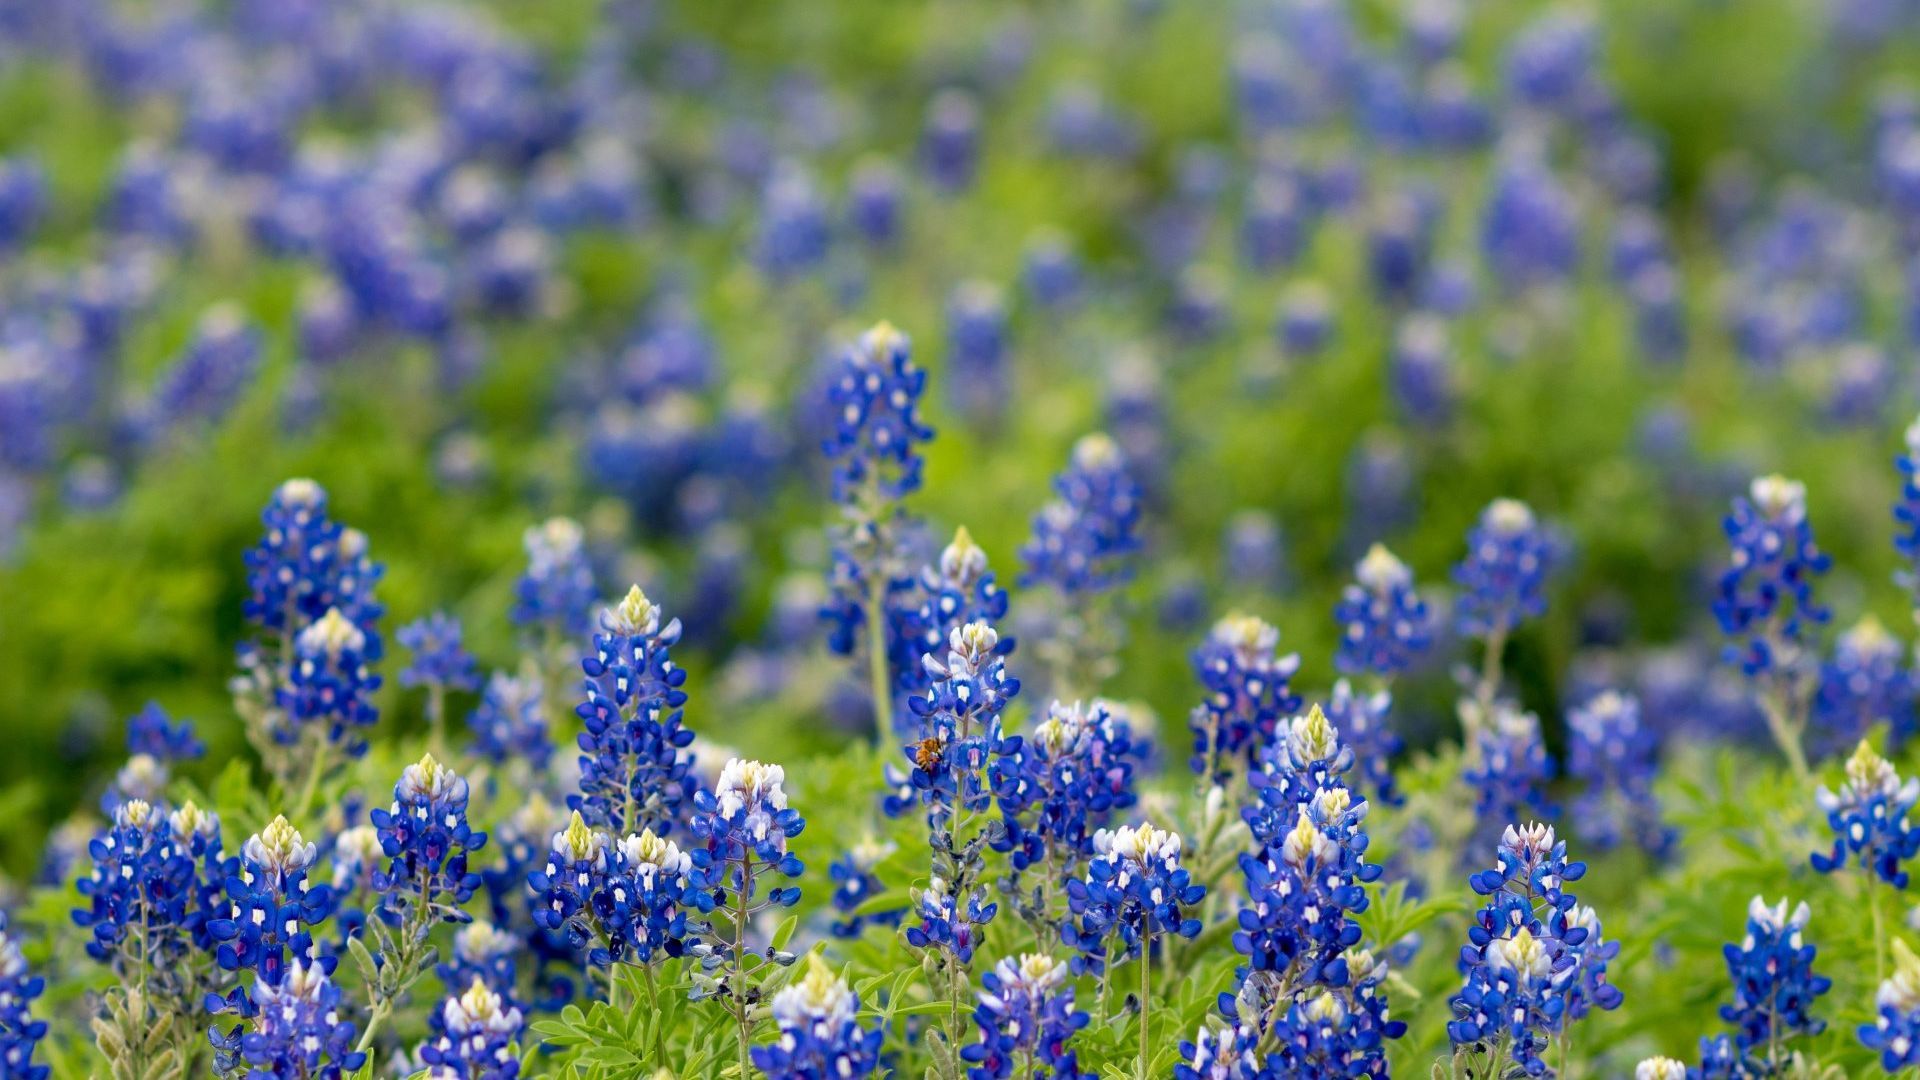 a field of blue flowers with green leaves in the background .